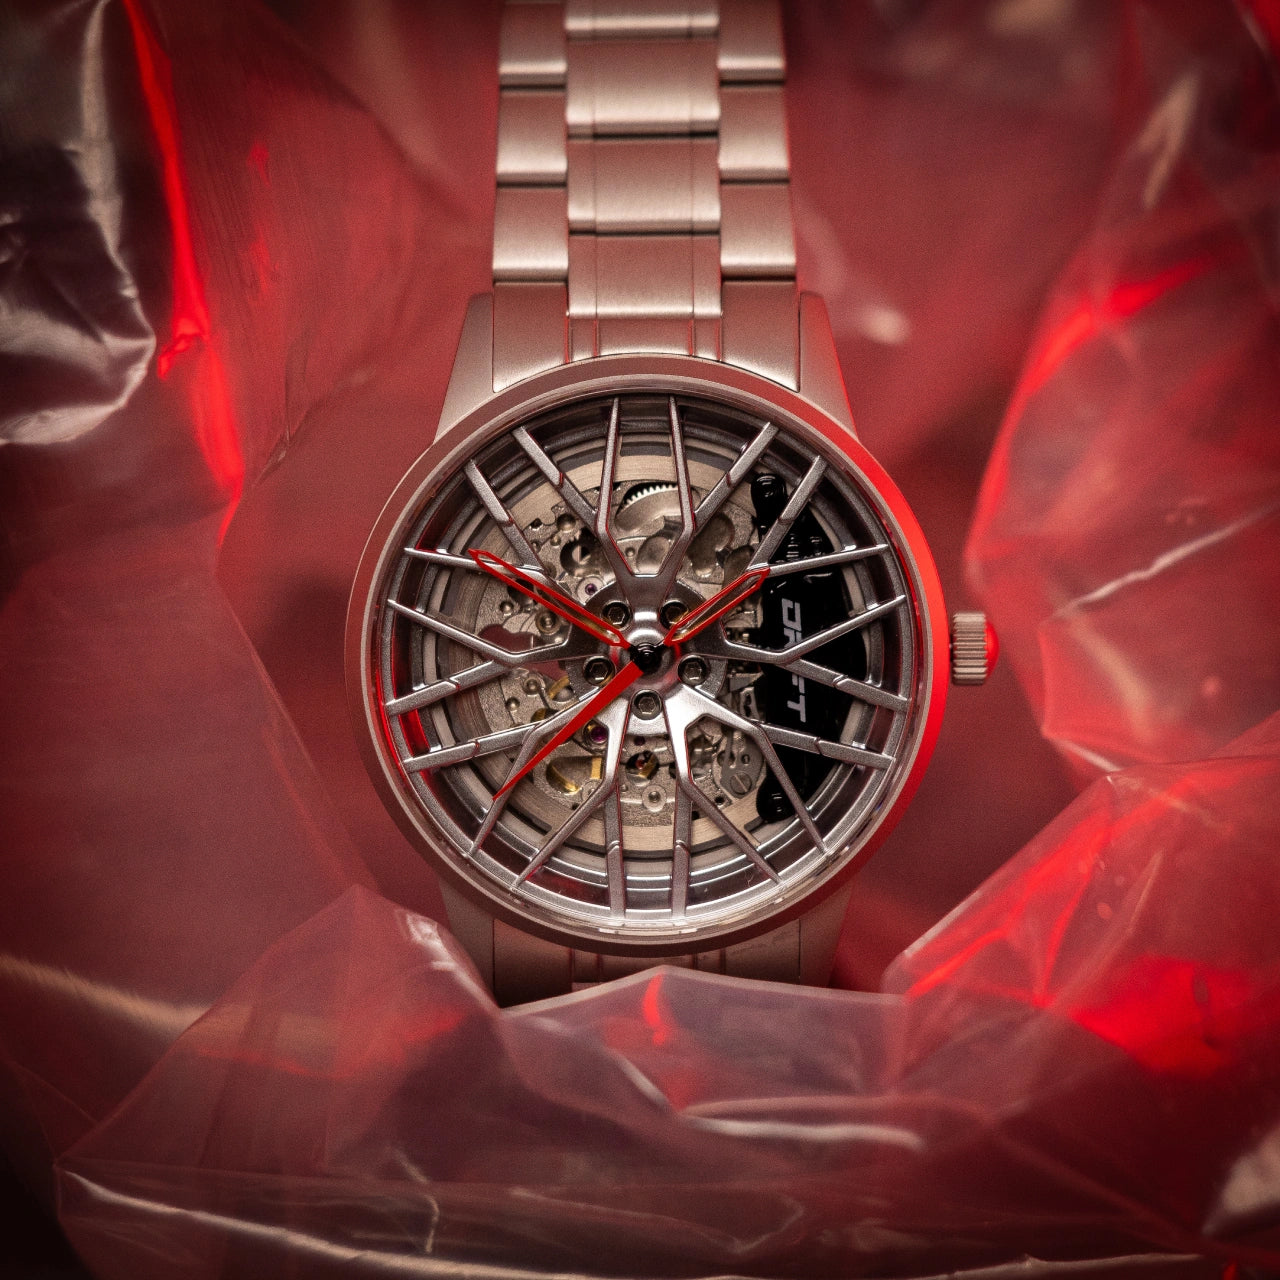 The image showcases an Automatic Motorsport EMS Edition wristwatch by DriftElement, set against a red backdrop. This timepiece features a wheel rim-inspired design, complete with visible mechanical components that highlight the intricacy of its engineering. Red hands on the watch face add a striking contrast, enhancing its automotive aesthetic. DriftElement, a fresh German startup, is the creator of this innovative watch, reflecting their dedication to unique and forward-thinking design.